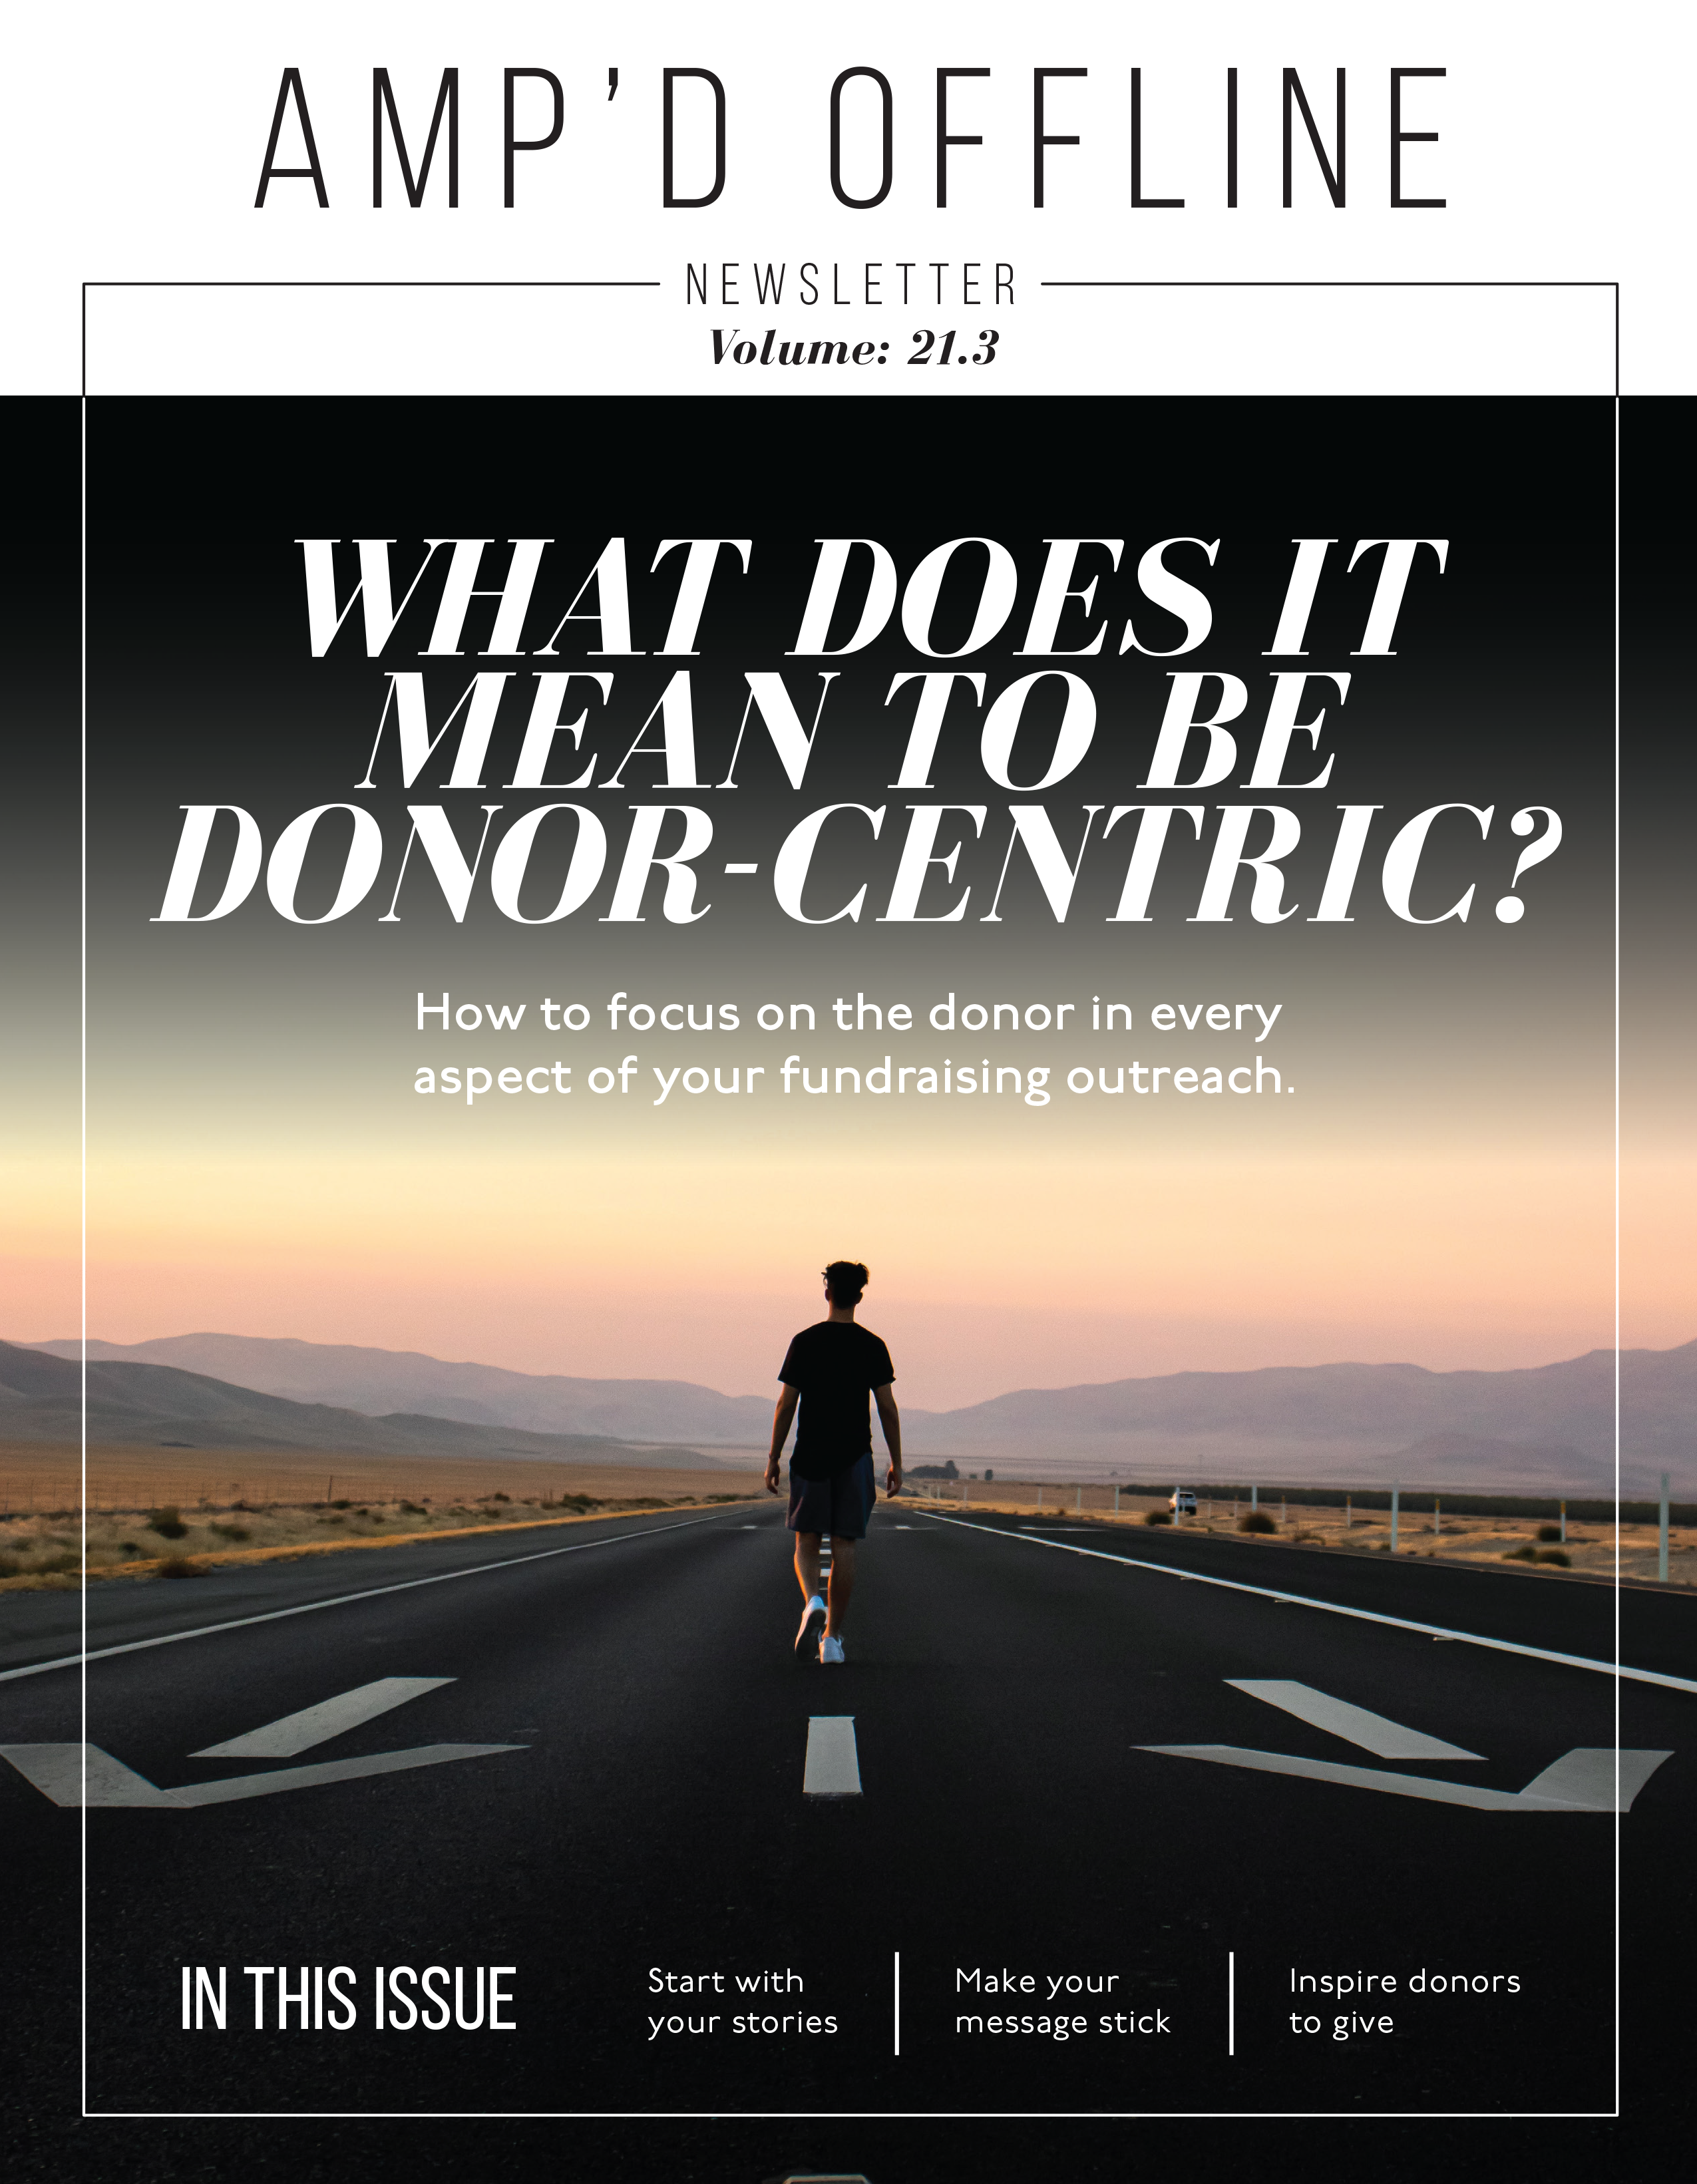 amp’d Offline Newsletter: What Does It Mean To Be Donor-Centric